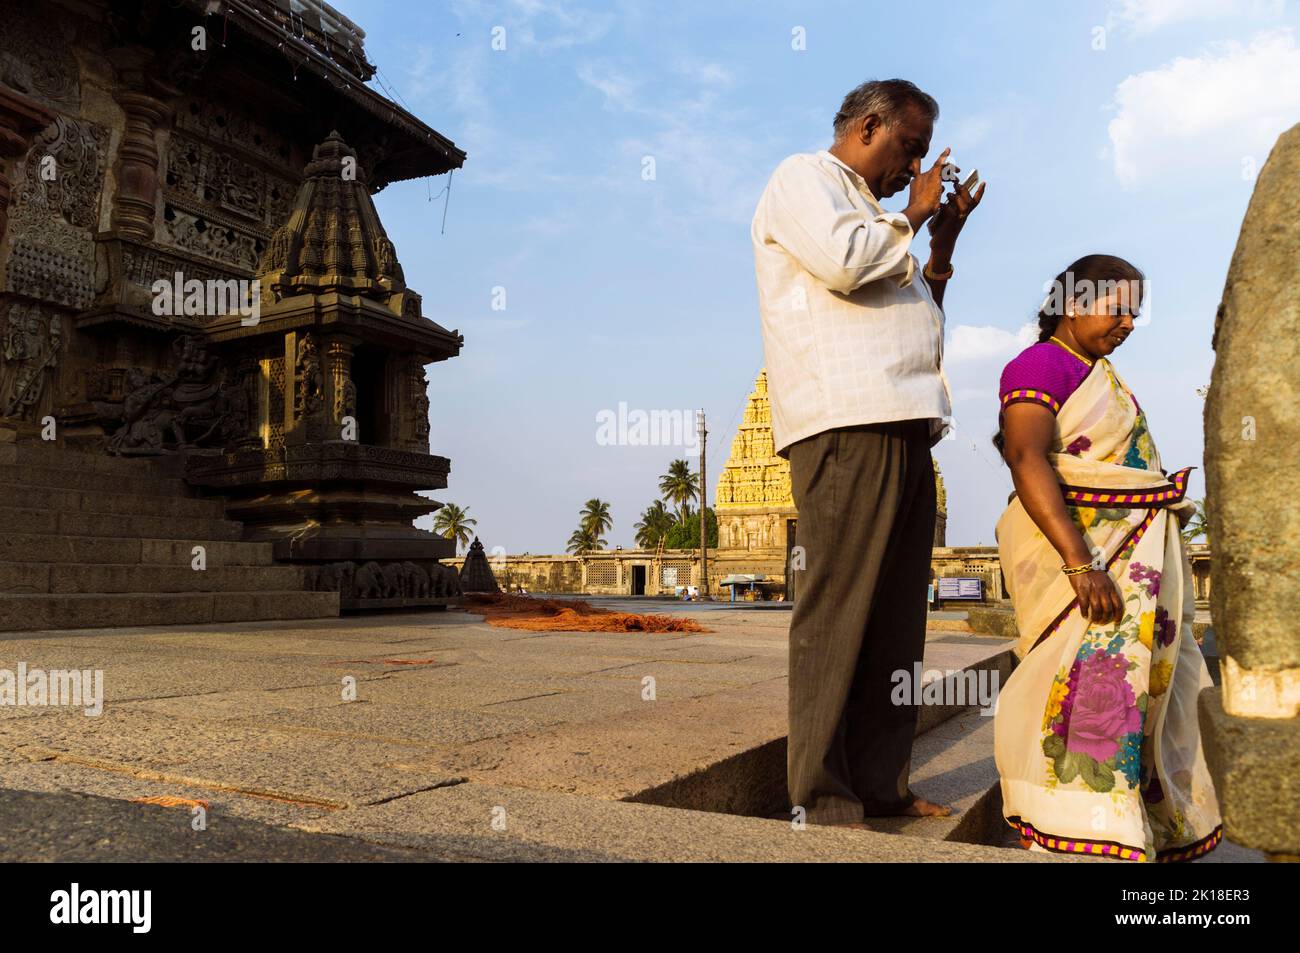 Belur, Karnataka, India : A man and a woman stand next to the 12th century Channakeshava Temple. Stock Photo